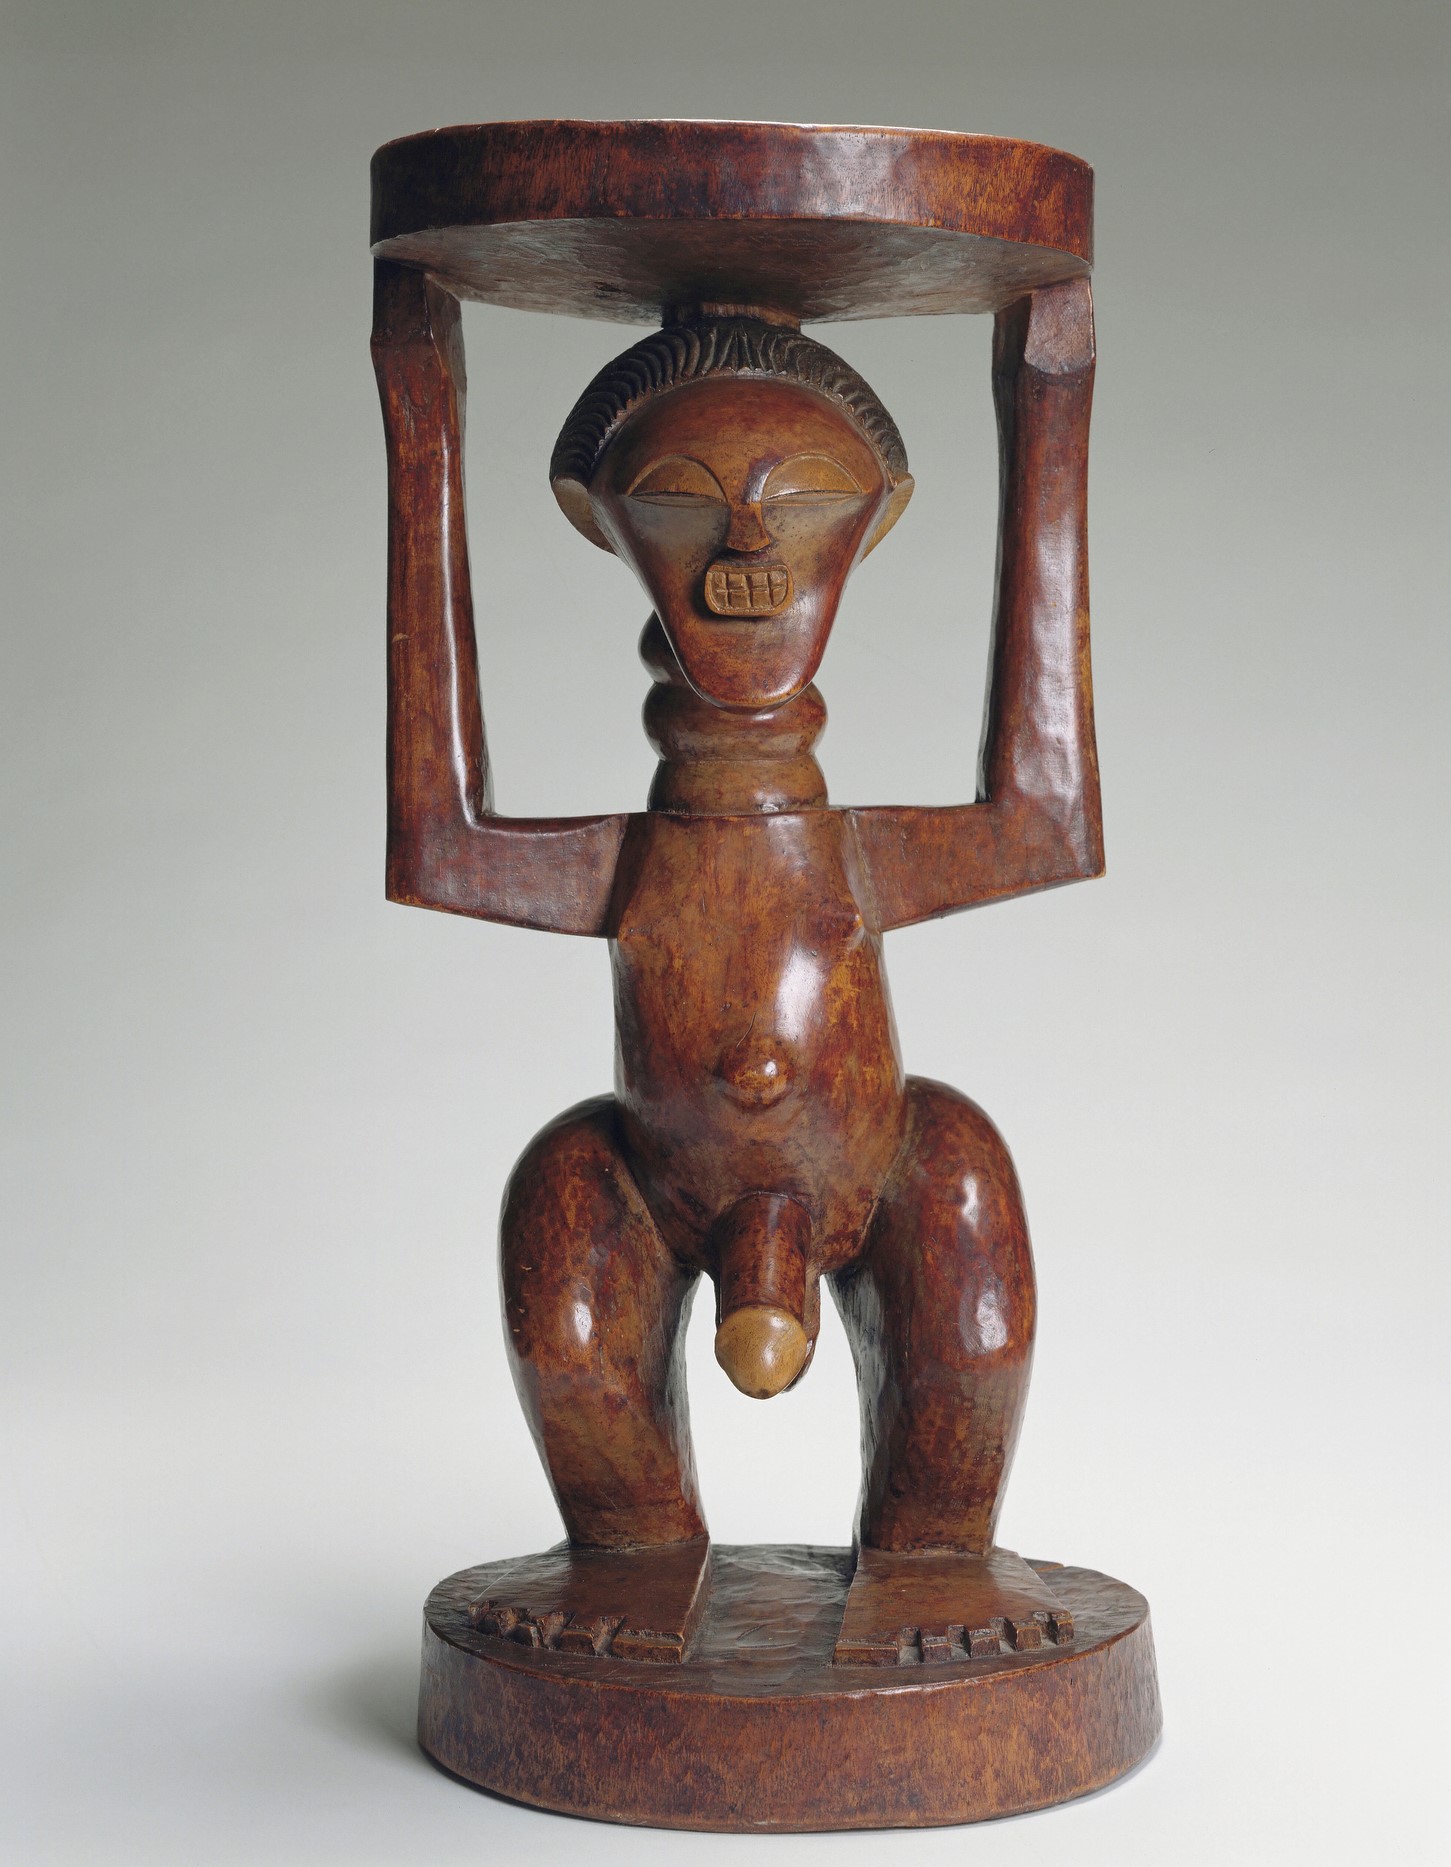 Wooden stool carved in figure of a naked man holding up the seat